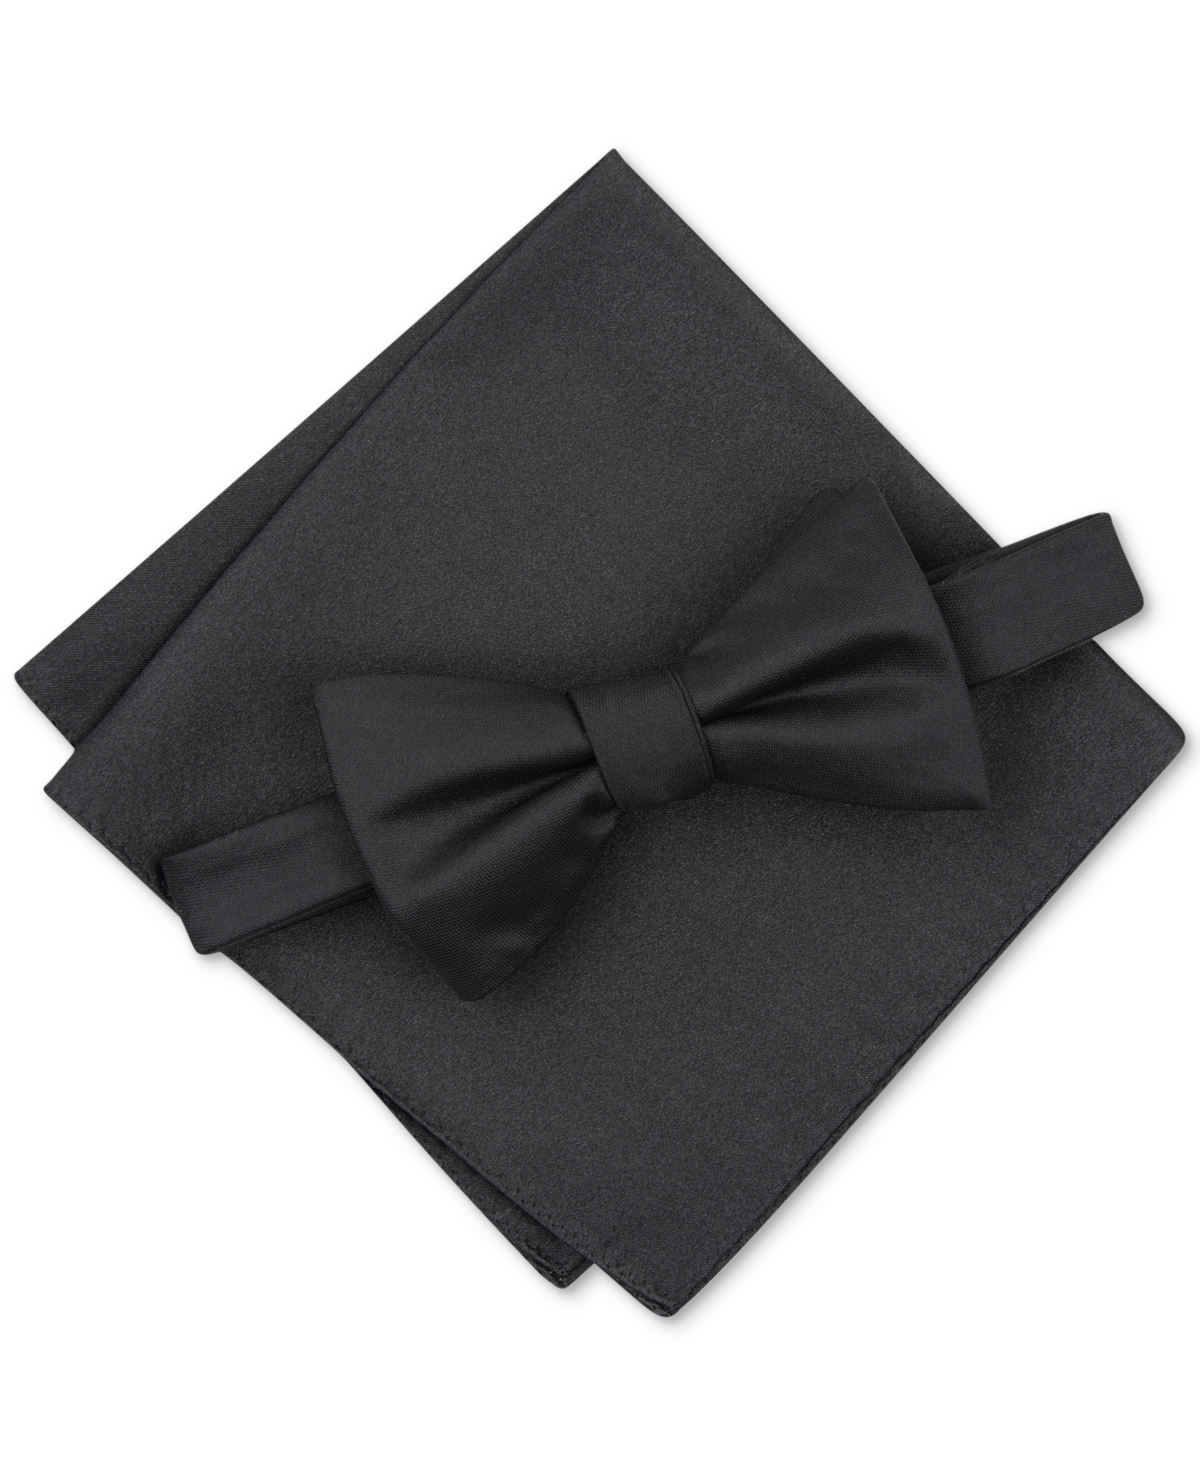 Men's Solid Texture Pocket Square and Bowtie, Created for Macy's - Mint